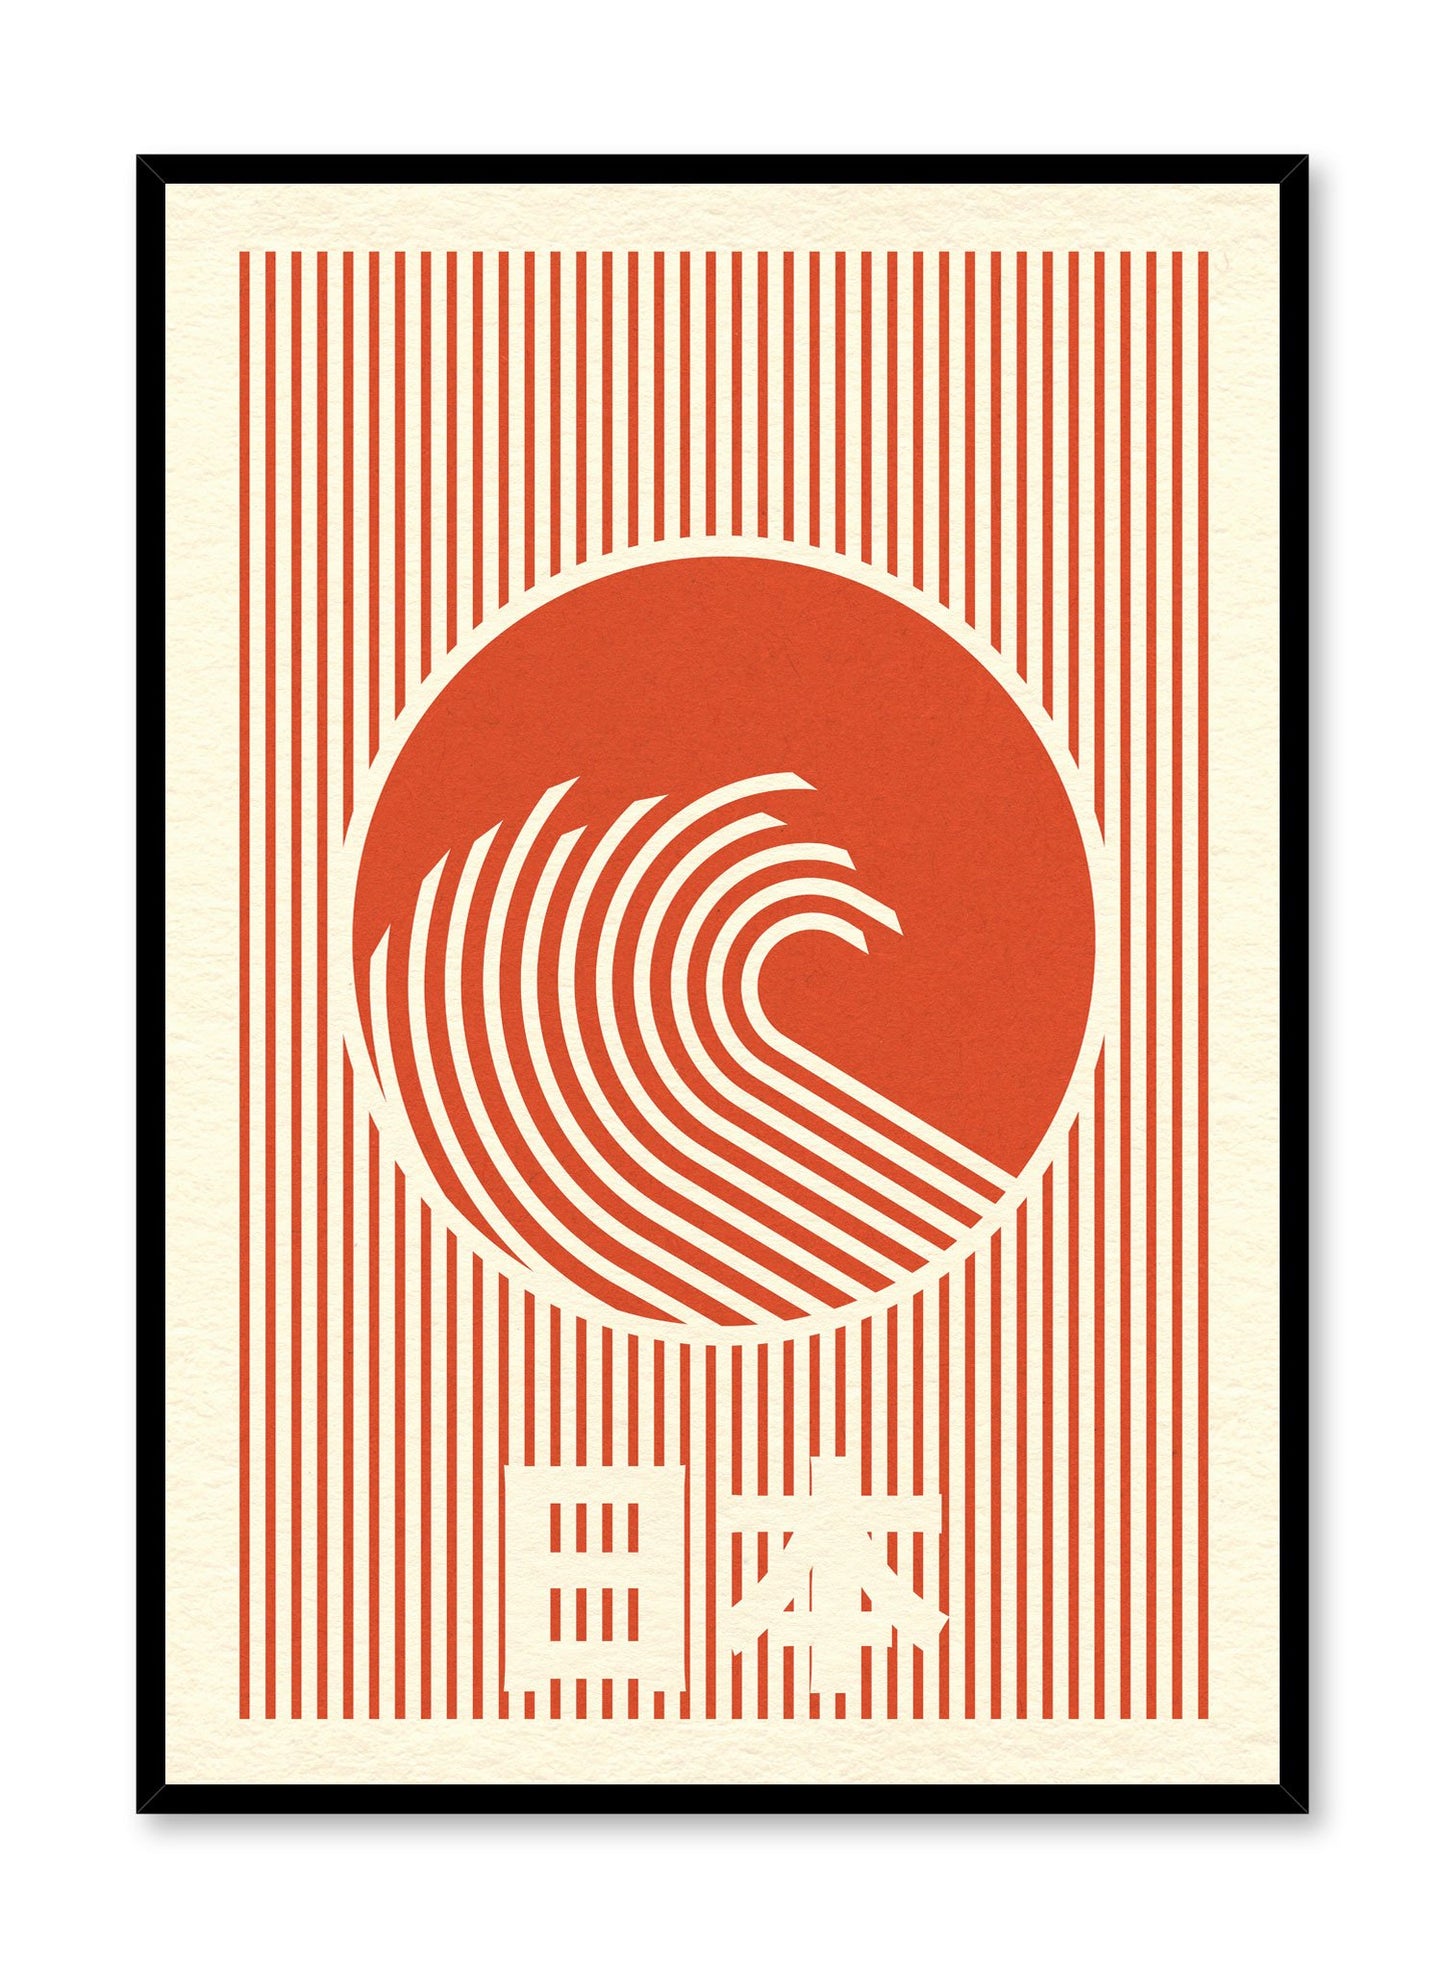 Minimalist pop art paper illustration by German artist Rosi Feist with Japanese style wave